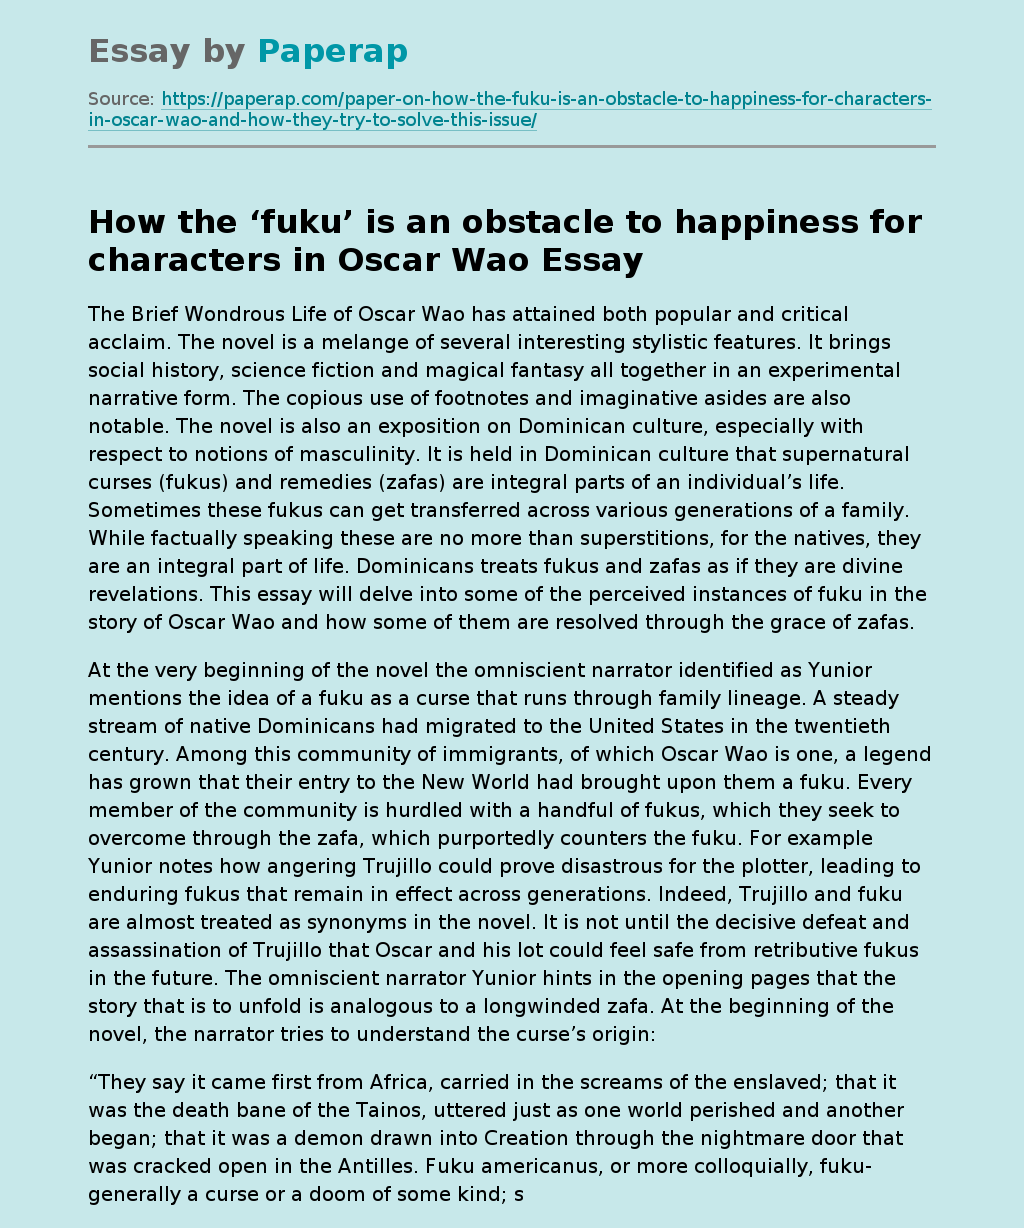 How the ‘fuku’ is an obstacle to happiness for characters in Oscar Wao